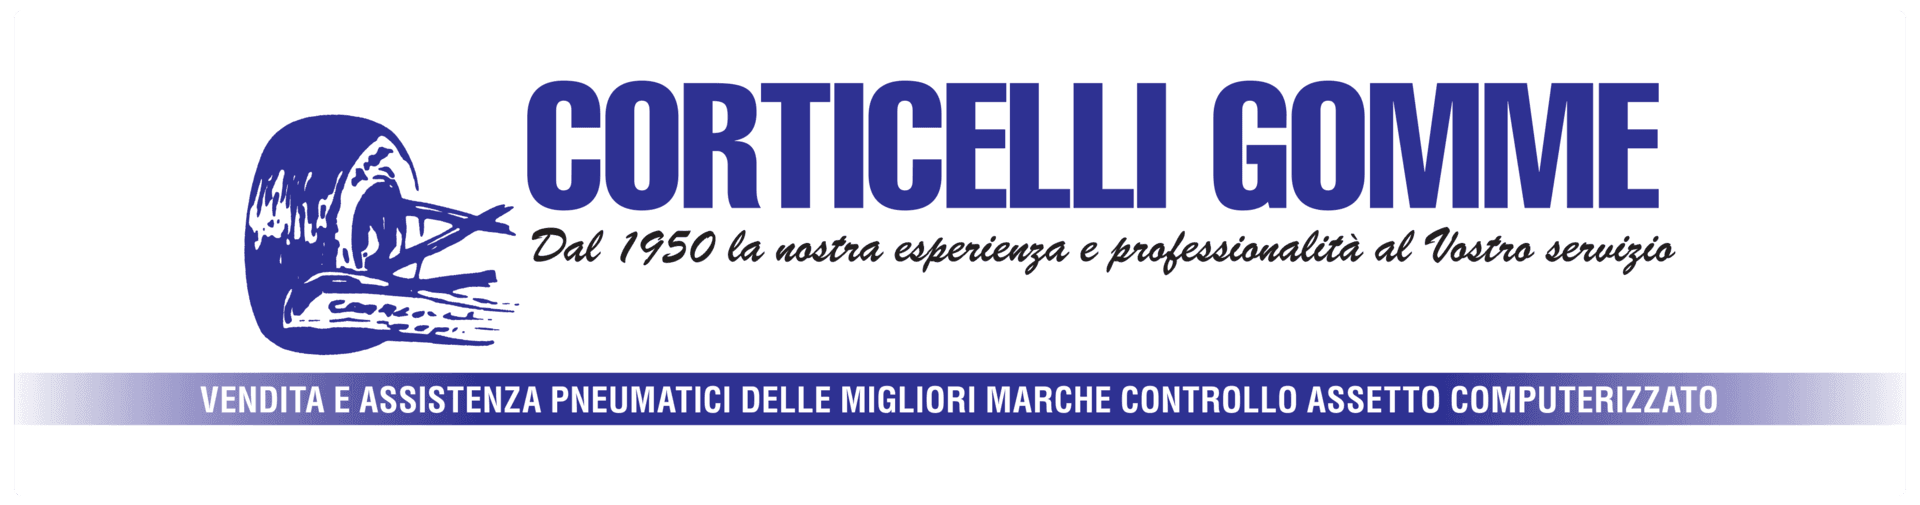 CORTICELLI GOMME - LOGO